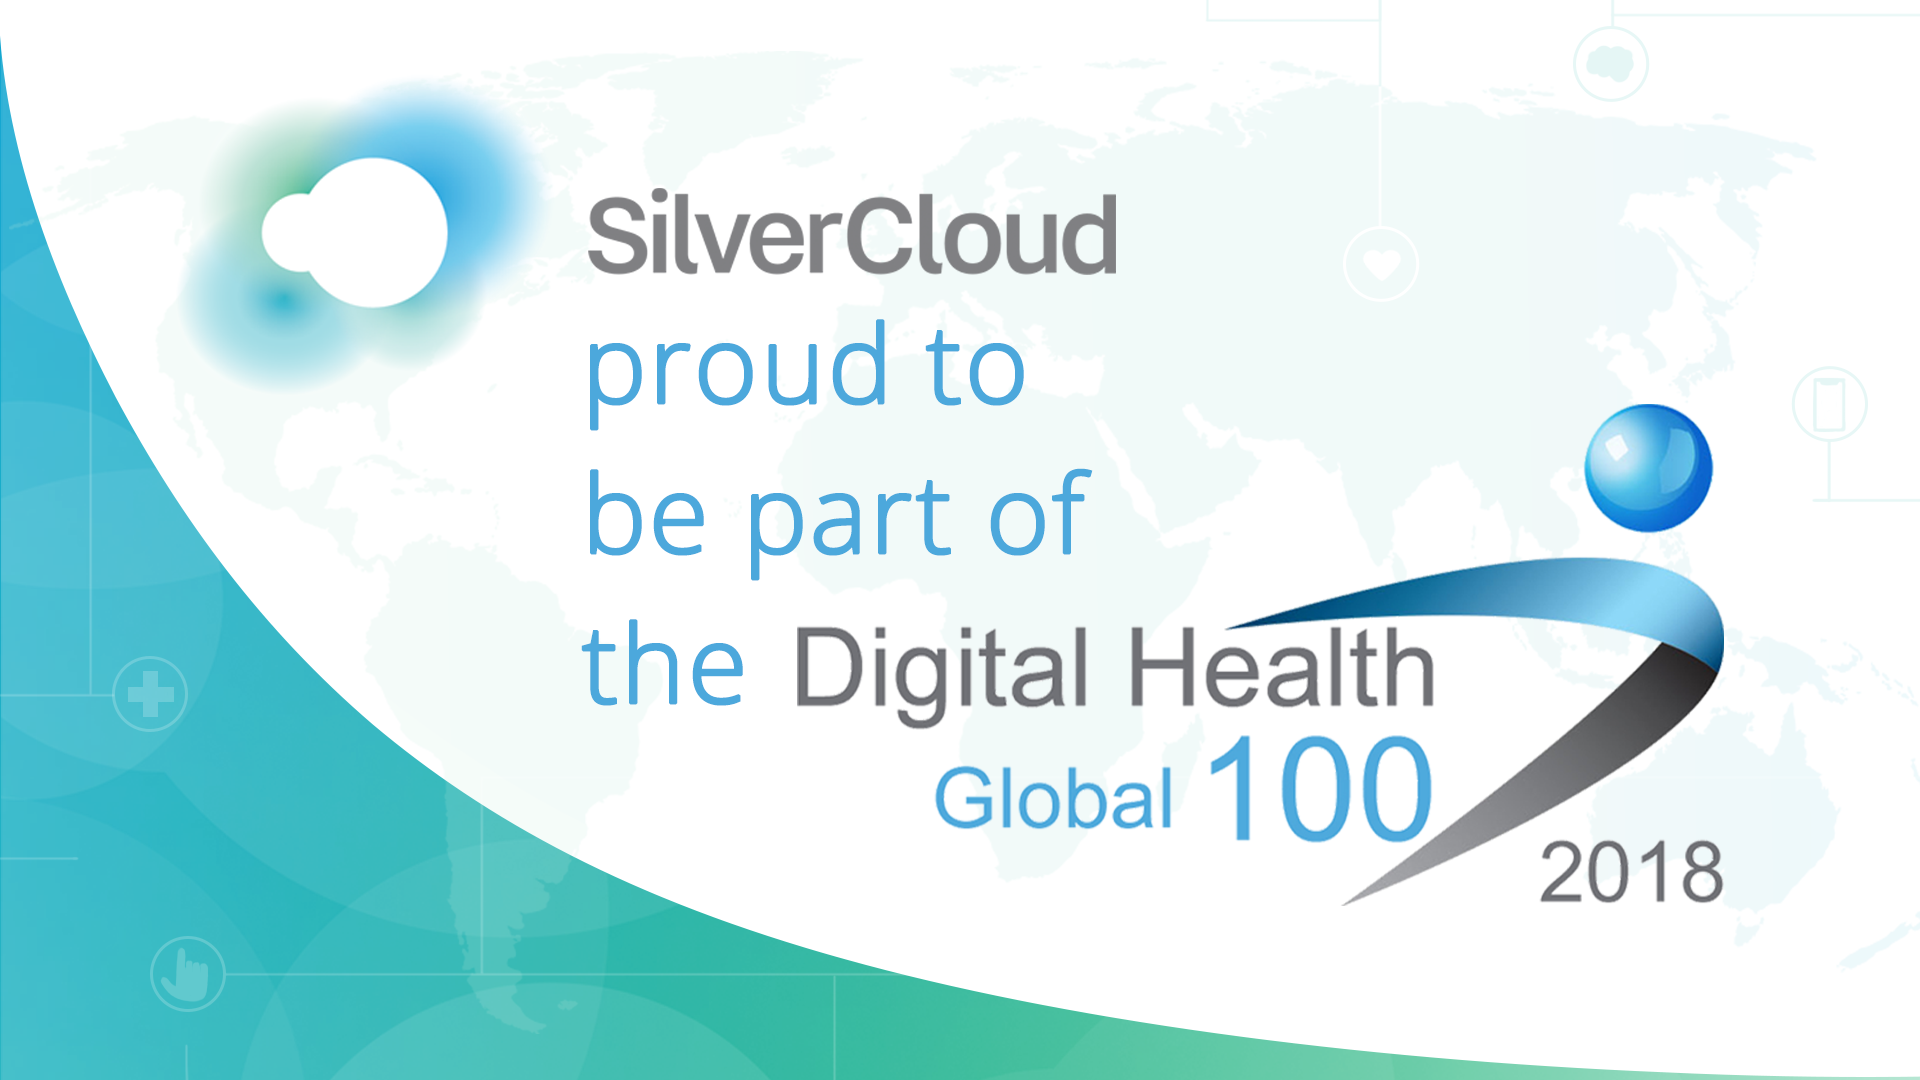 The words SilverCloud proud to be part of the digital health global 100 2018.